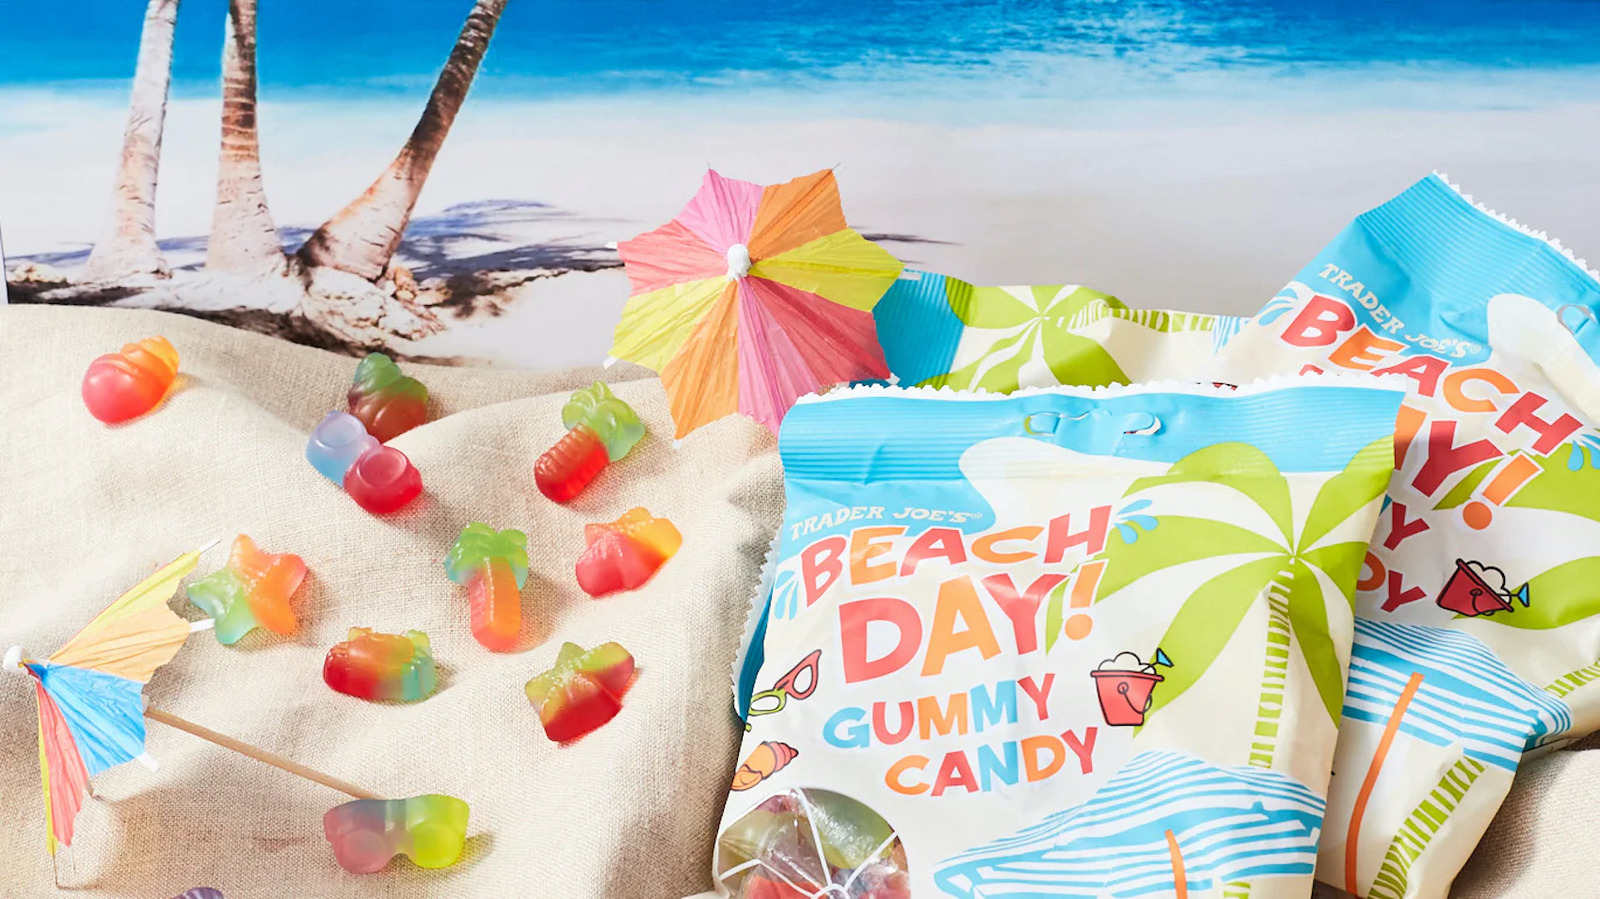 The Summery Trader Joe's Gummies That May Be The Best Yet